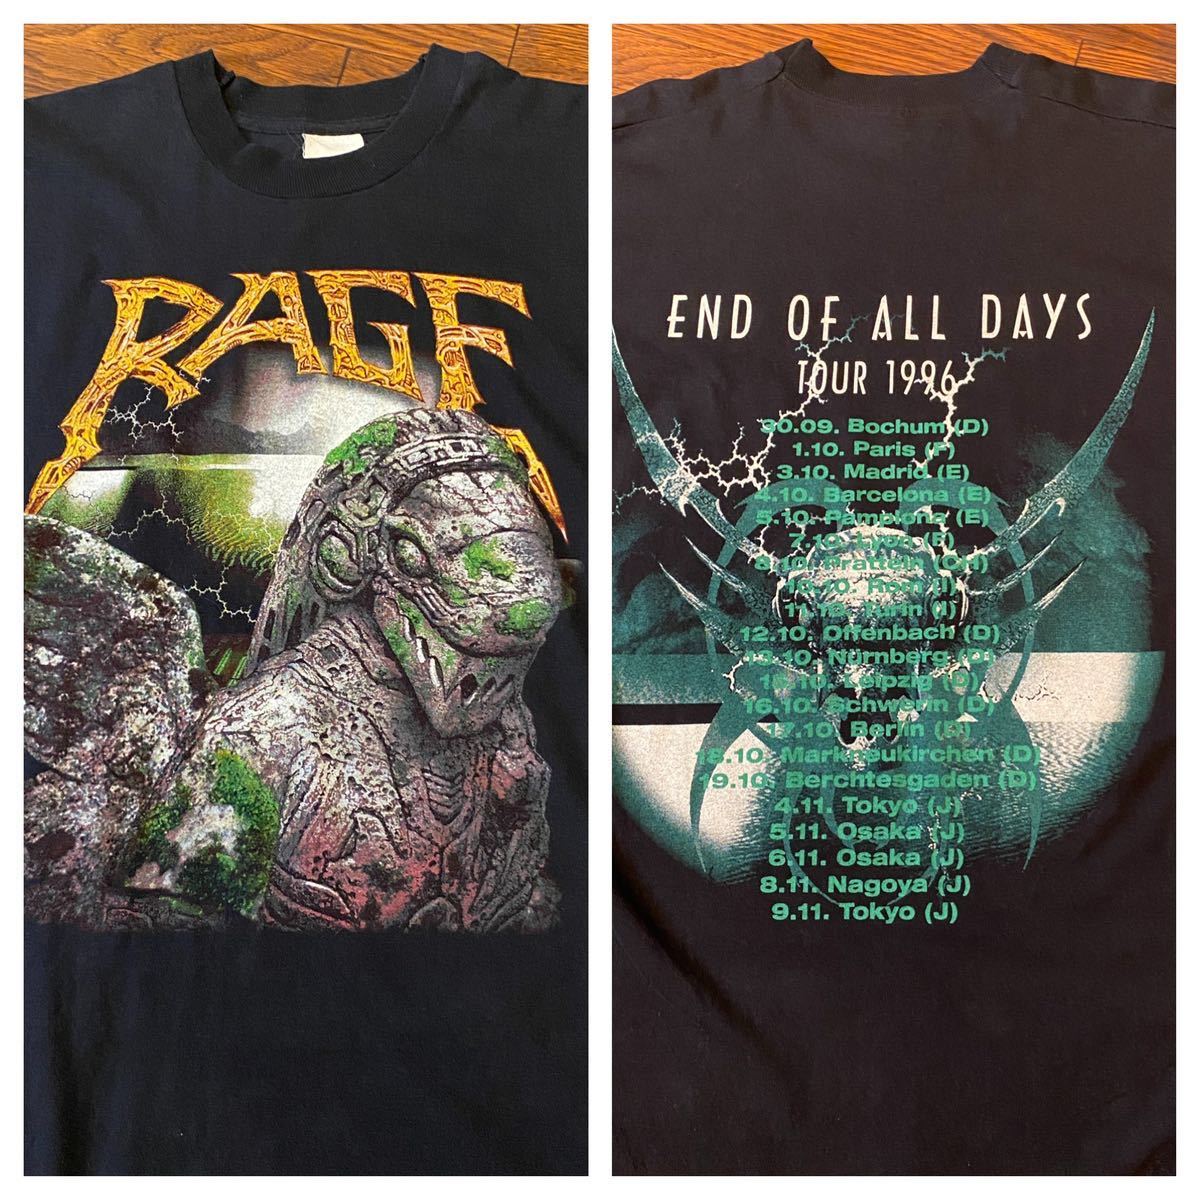 90s/RAGE レイジ/日本ツアー　Tシャツ/End of All days/IRON MAIDEN/Gamma Ray/METALLICA/Blind Guardian/OVERKILL/ANTHRAX/megadeth_画像1